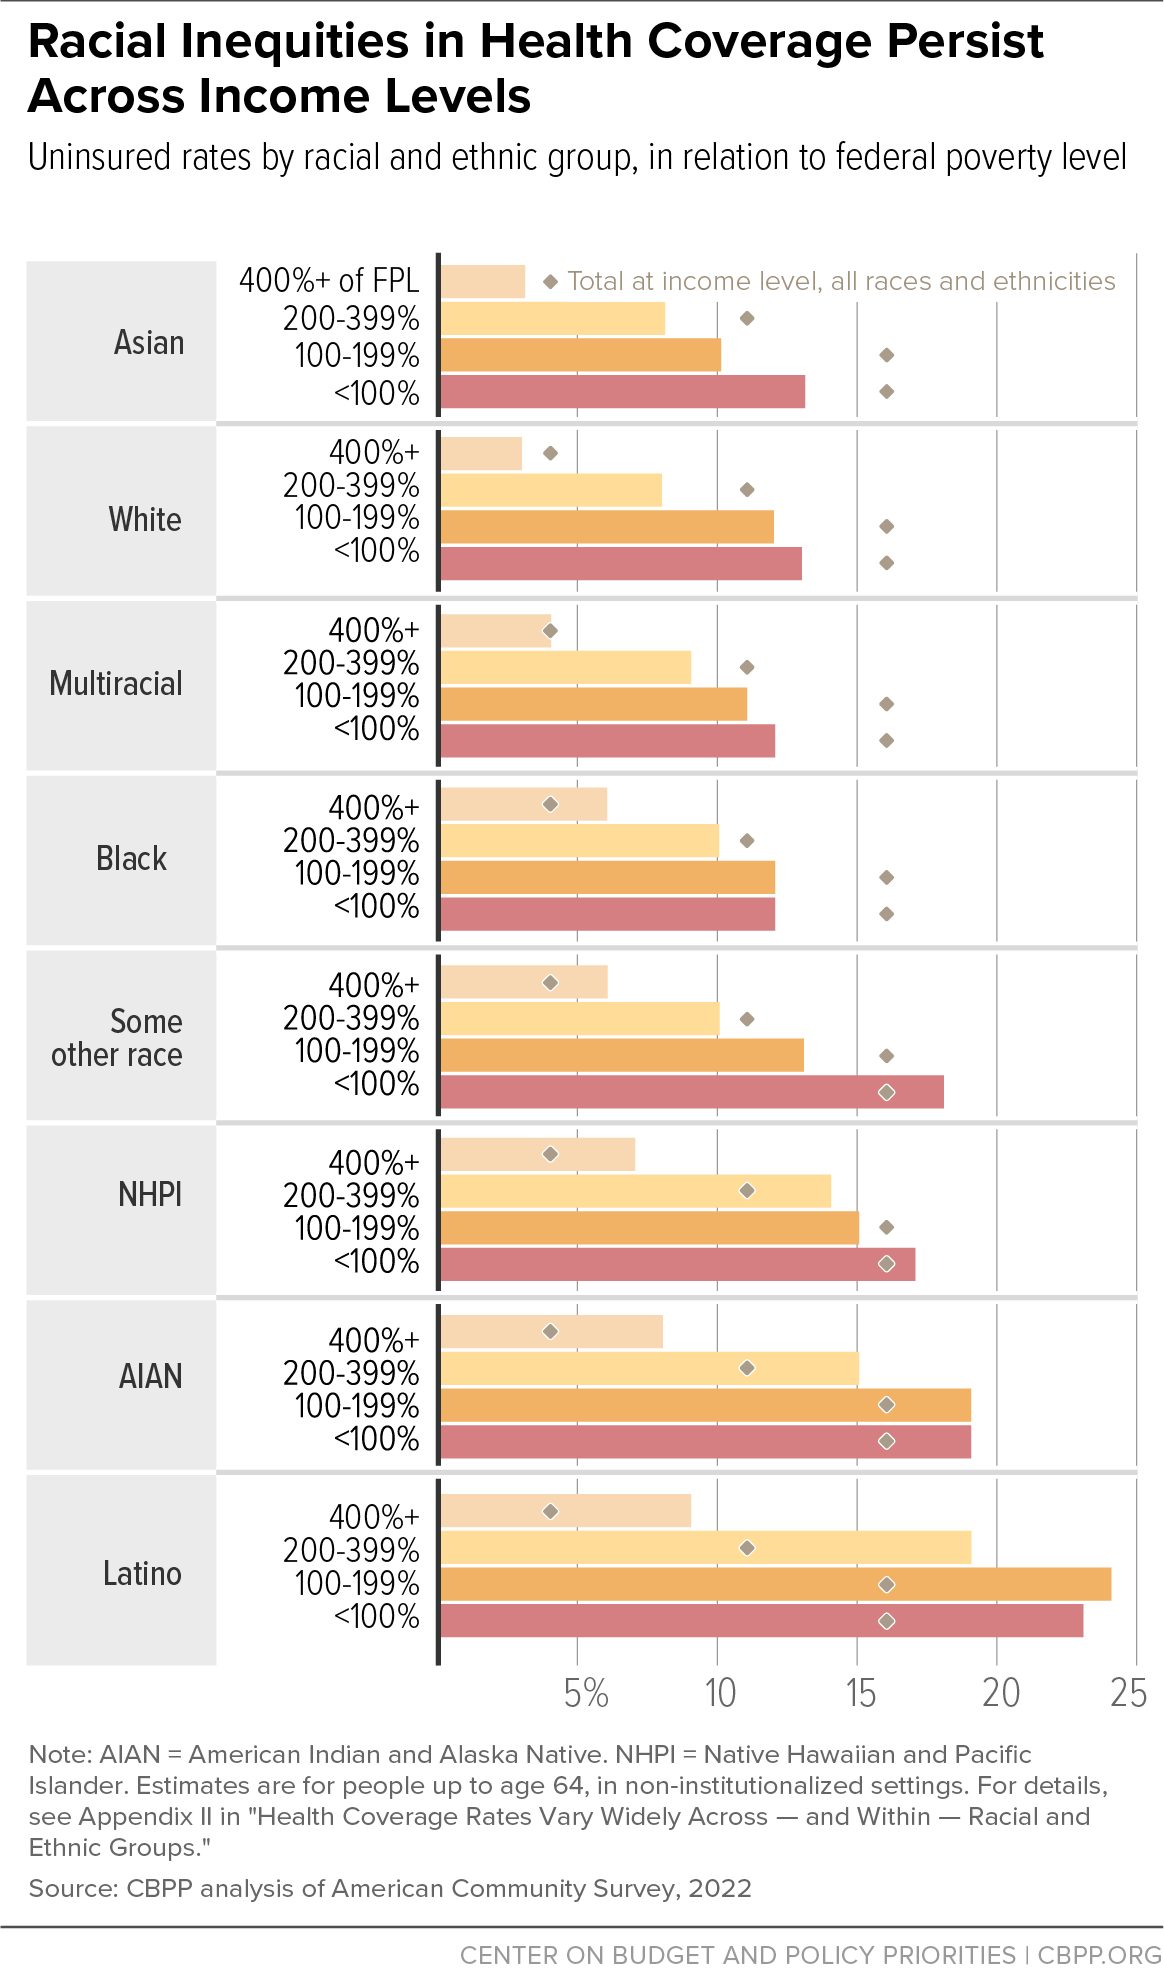 Racial Inequities in Health Coverage Persist Across Income Levels